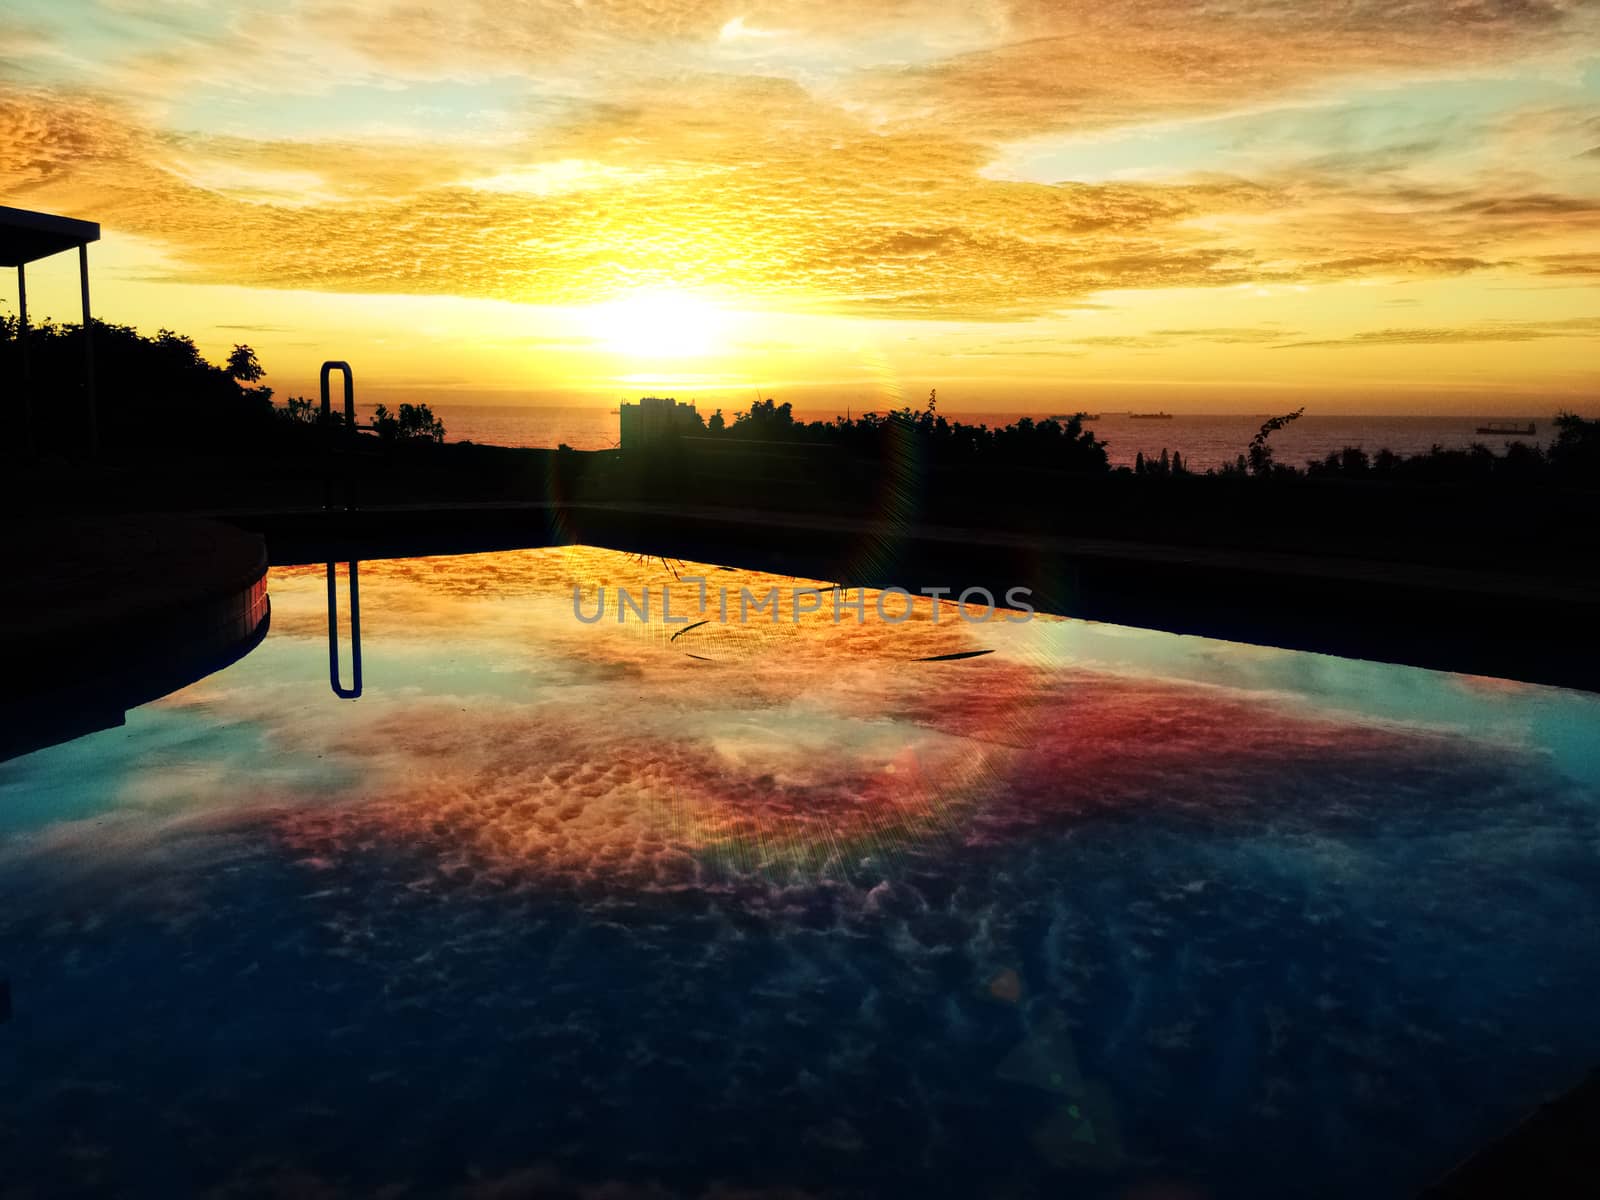 Sunset spreading light into clouds in africa over reflective pool